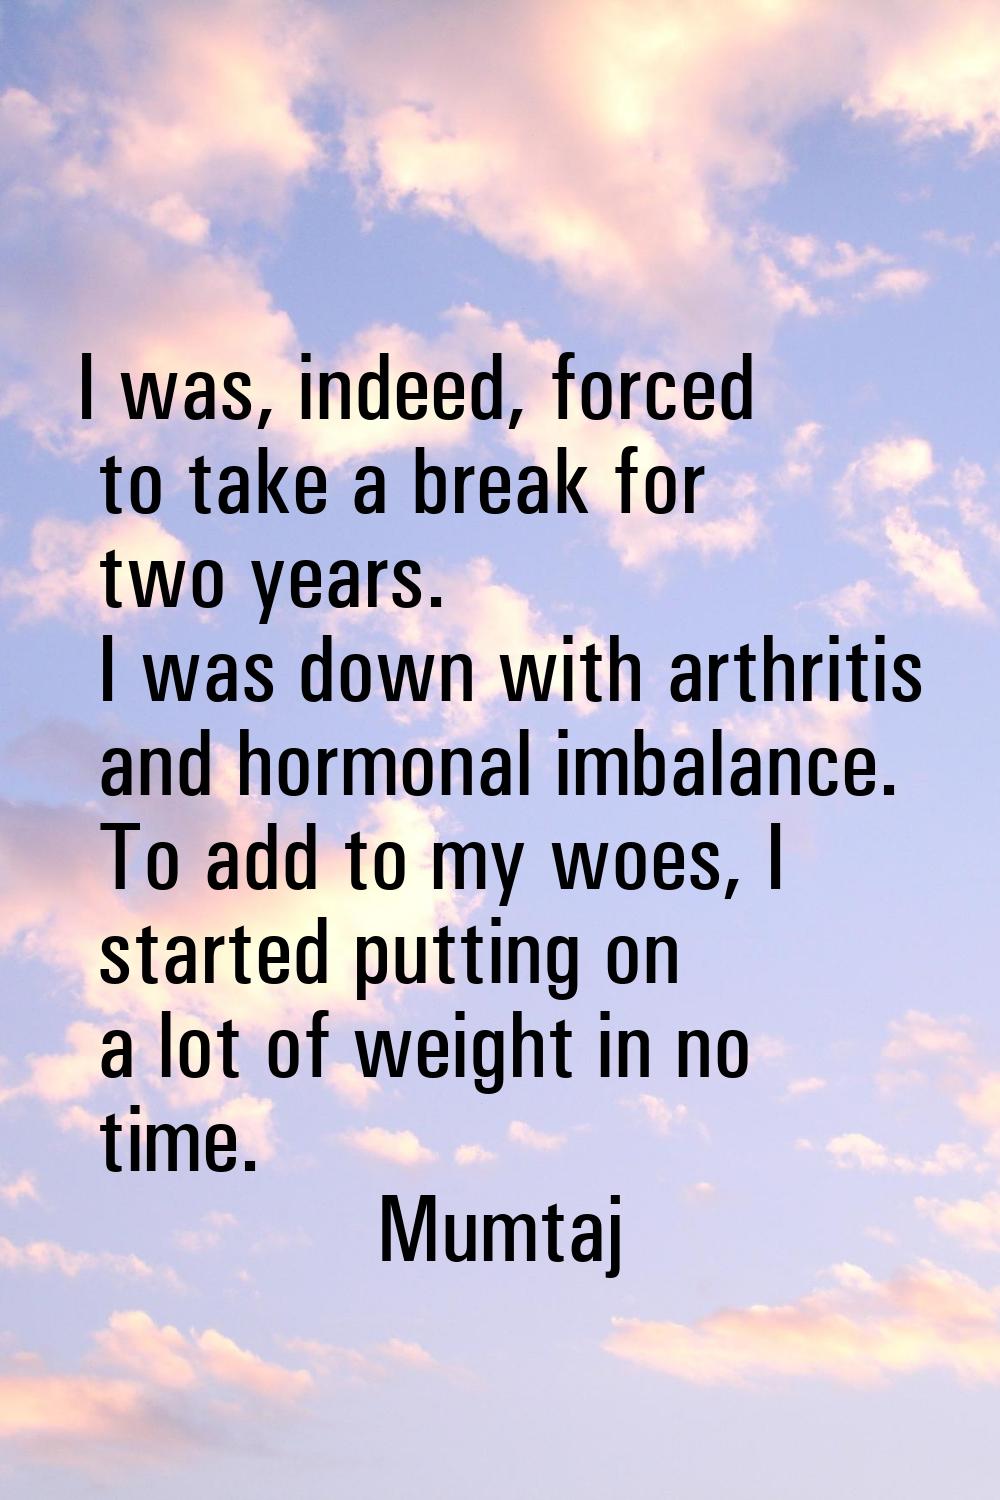 I was, indeed, forced to take a break for two years. I was down with arthritis and hormonal imbalan